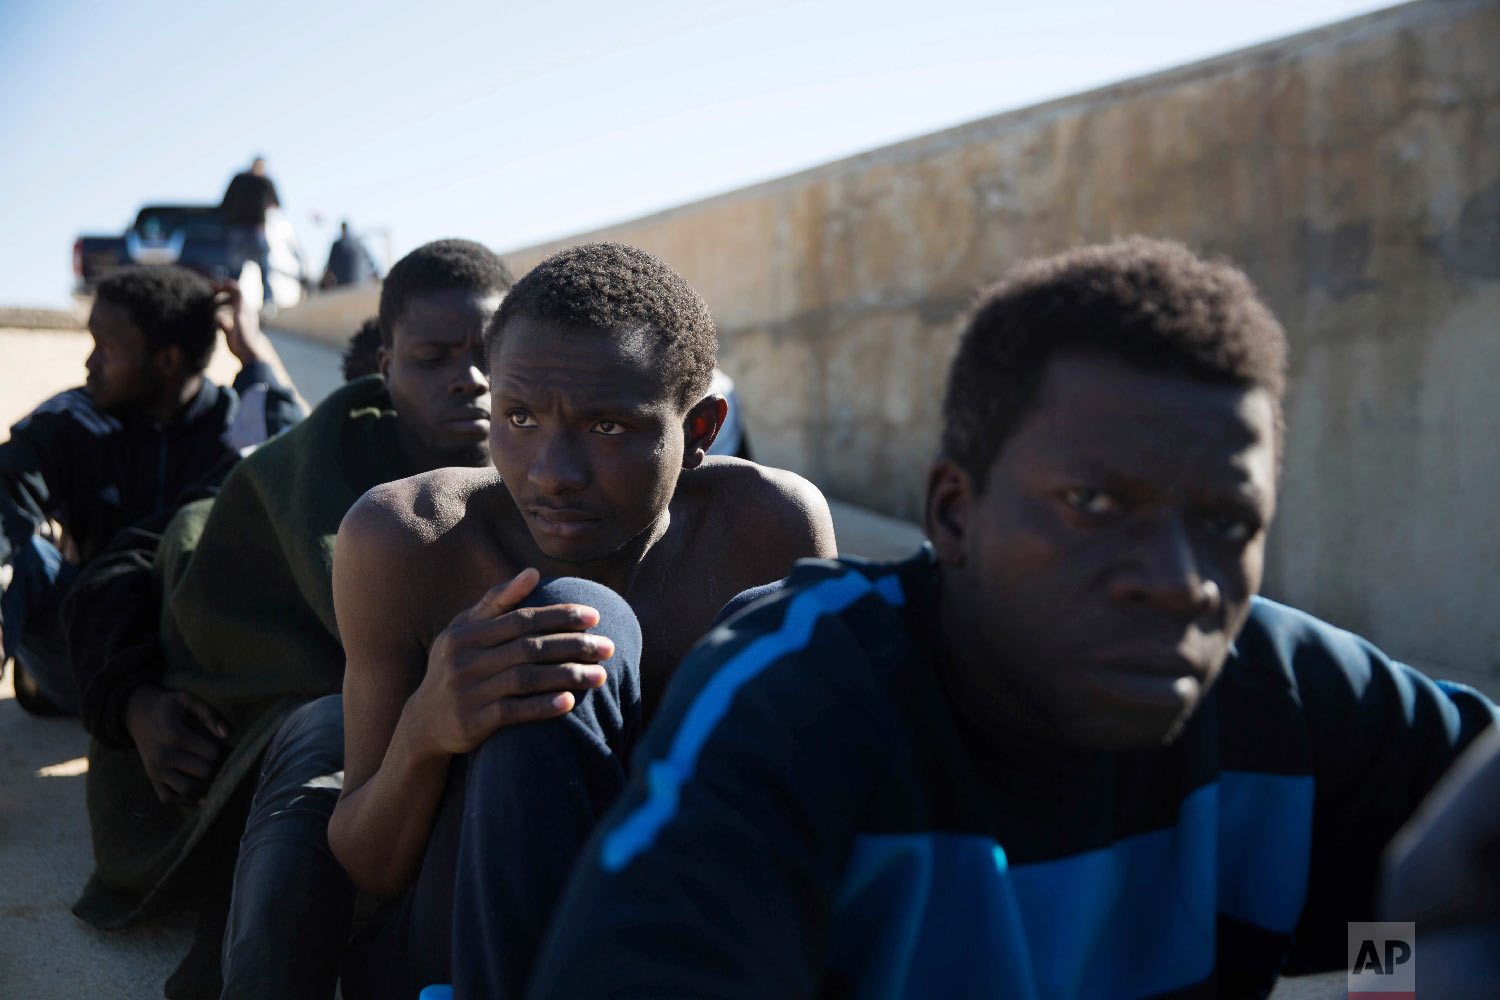  Migrants rest on the sidewalk port of Tripoli they were rescued by the Coast Guard off the coast of Tripoli, Libya, March 3, 2017.  (AP Photo/Mohamed Ben Khalifa) 